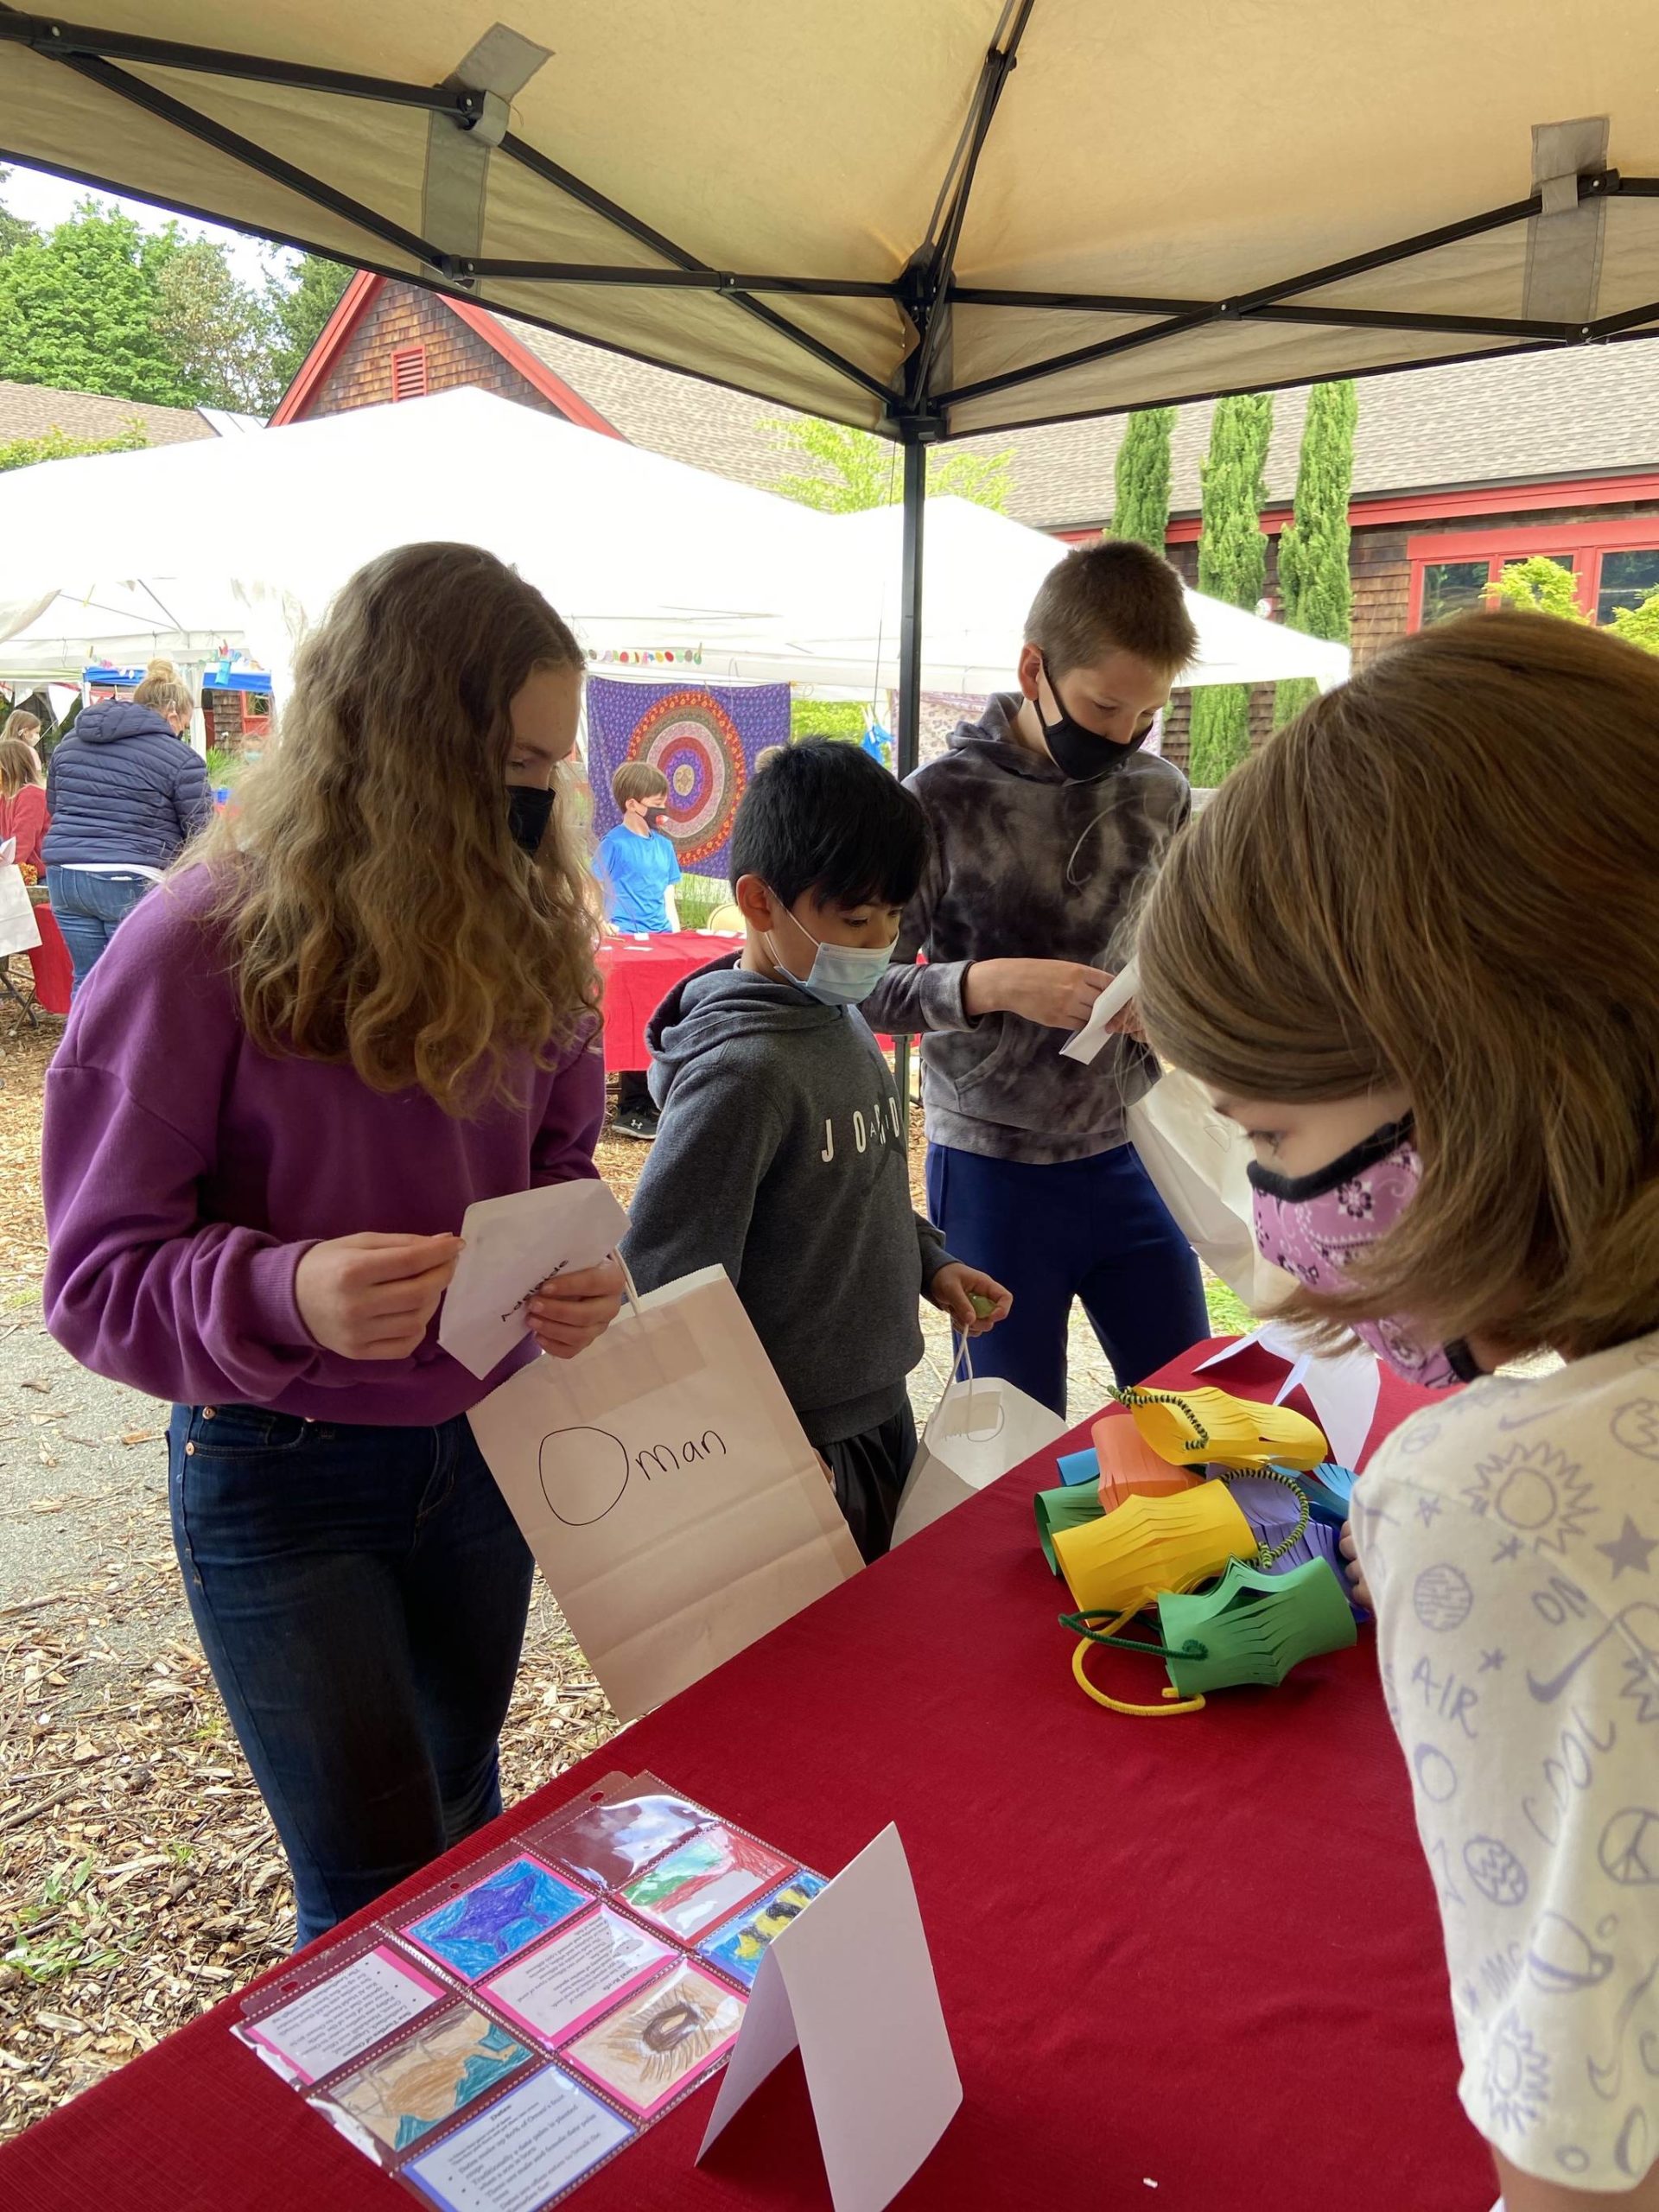 Fifth graders Adelaide Scott, 11, Cruz Garcia, 10, and Dylan MacCulloch, 11, admire the paper lanterns and handmade trading cards offered by Liviana Lannon Eatinger, 8.